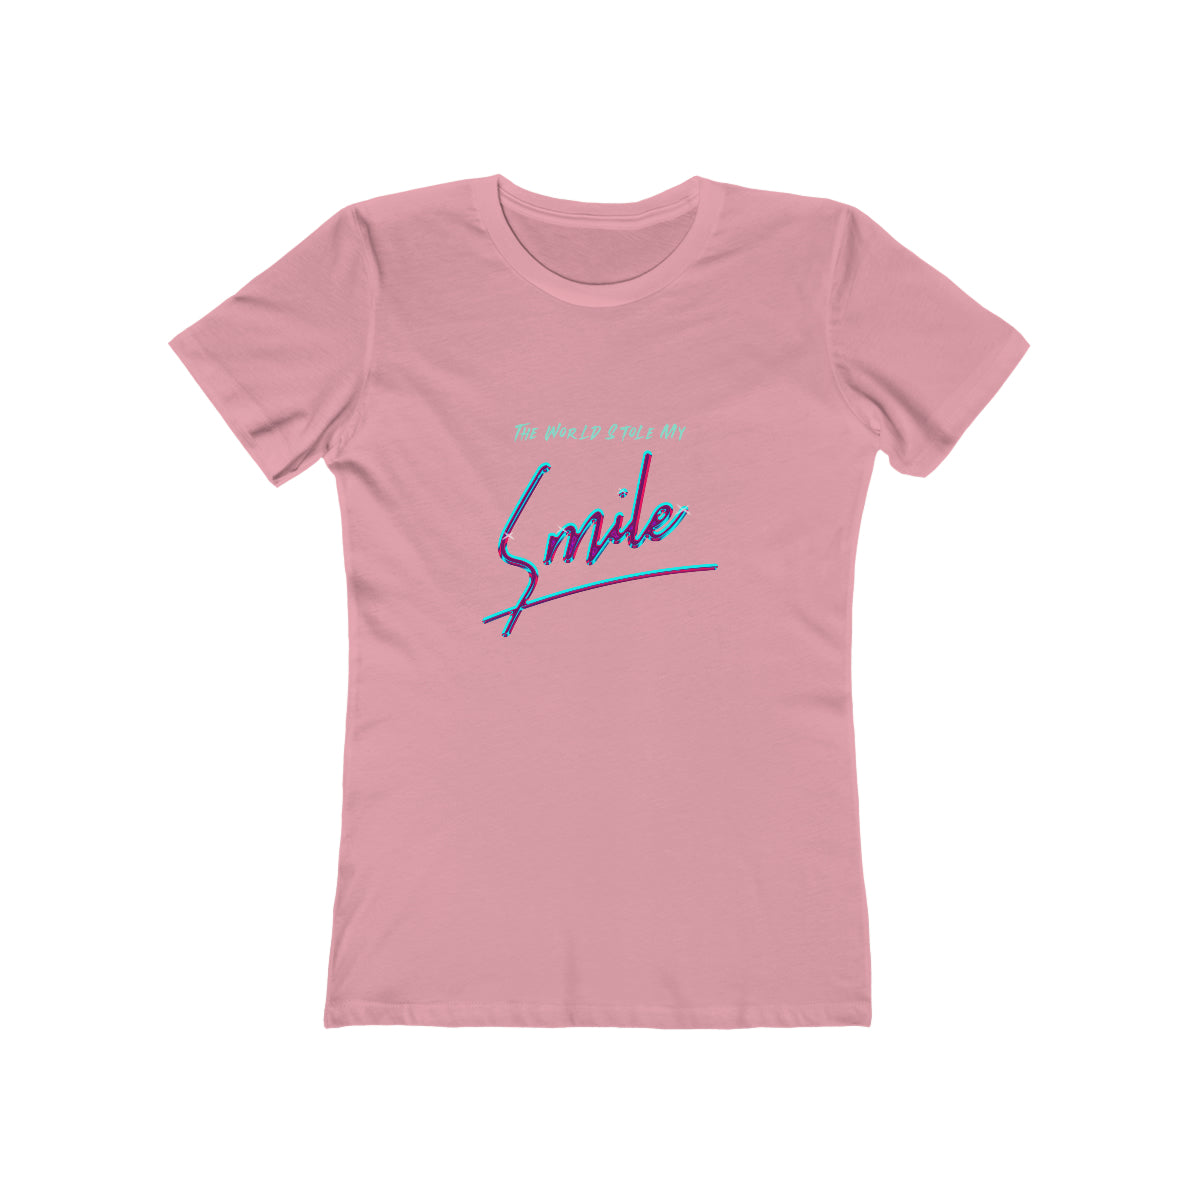 The World Stole My Smile - Women's T-shirt